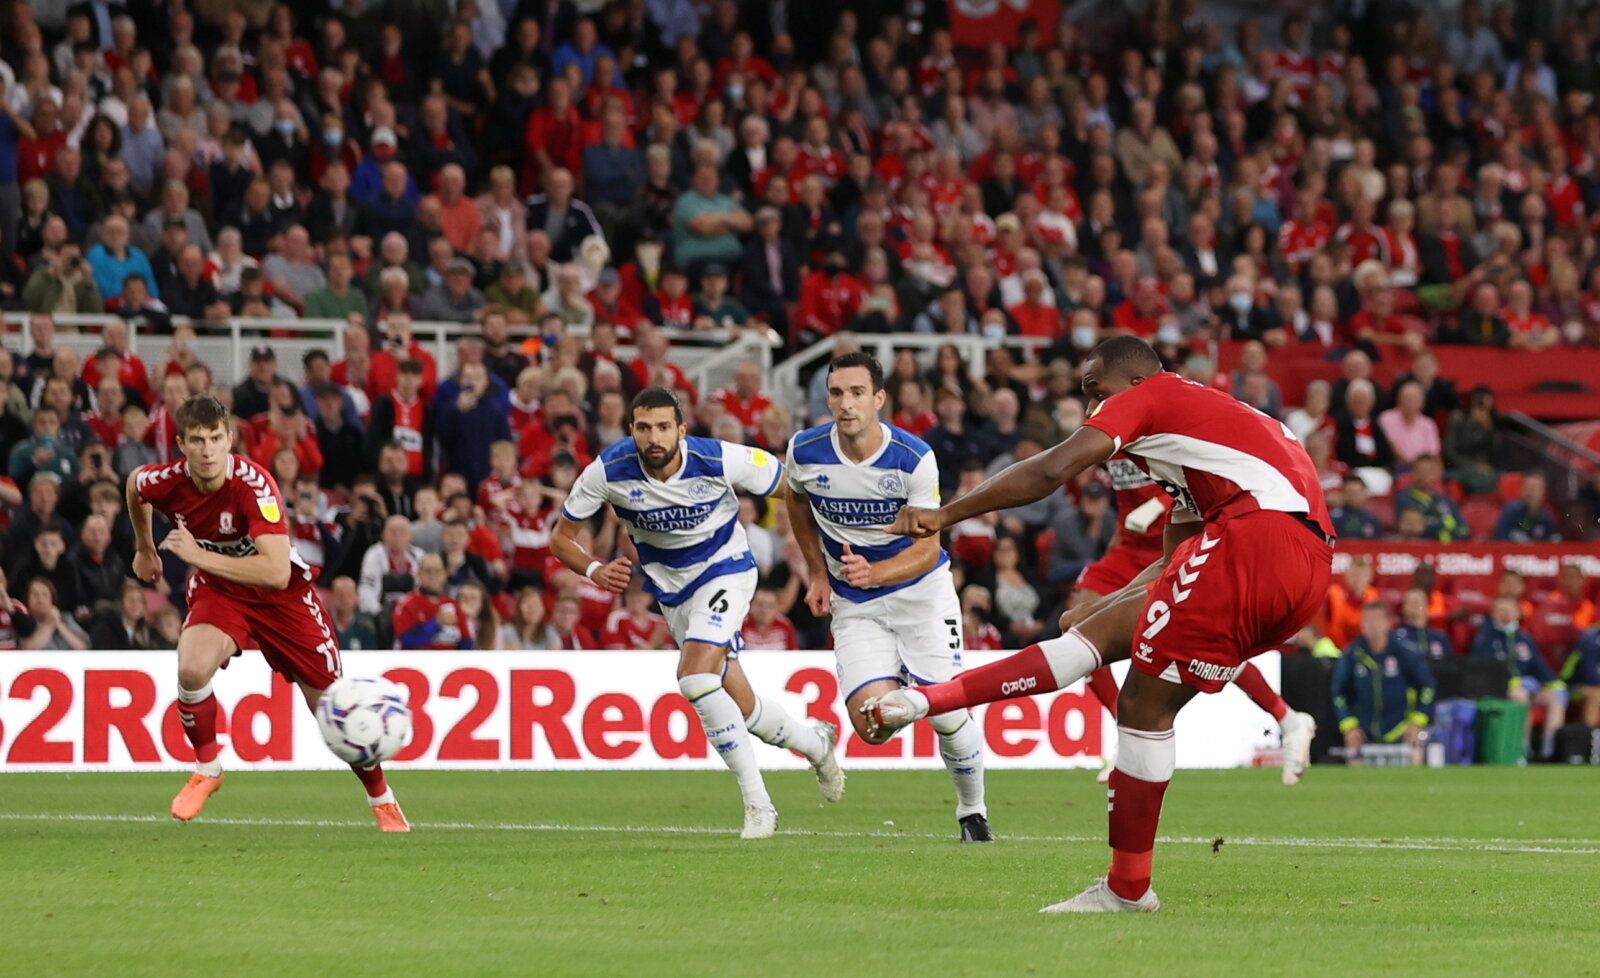 Soccer Football - Championship - Middlesbrough v Queens Park Rangers - Riverside Stadium, Middlesbrough, Britain - August 18, 2021   Middlesbrough's Uche Ikpeazu scores their first goal from the penalty spot   Action Images/Lee Smith    EDITORIAL USE ONLY. No use with unauthorized audio, video, data, fixture lists, club/league logos or 